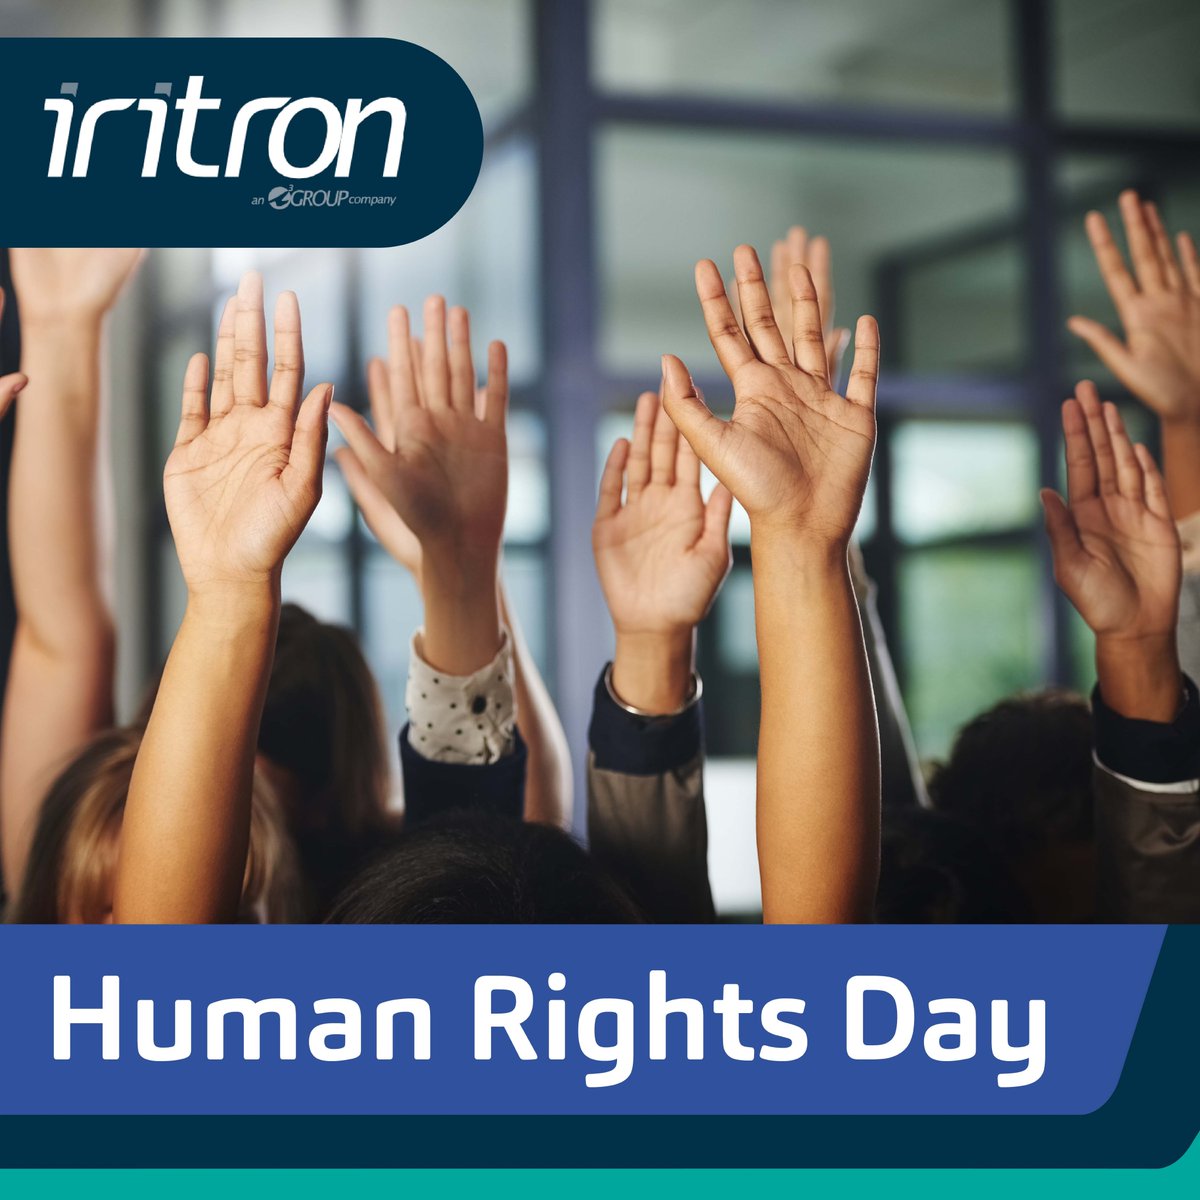 As we mark Human Rights Day, let's focus on the ties that bind us together. In unity, we find strength. Together, we can overcome challenges and create a world where everyone's rights are respected.    

#HumanRightsDay